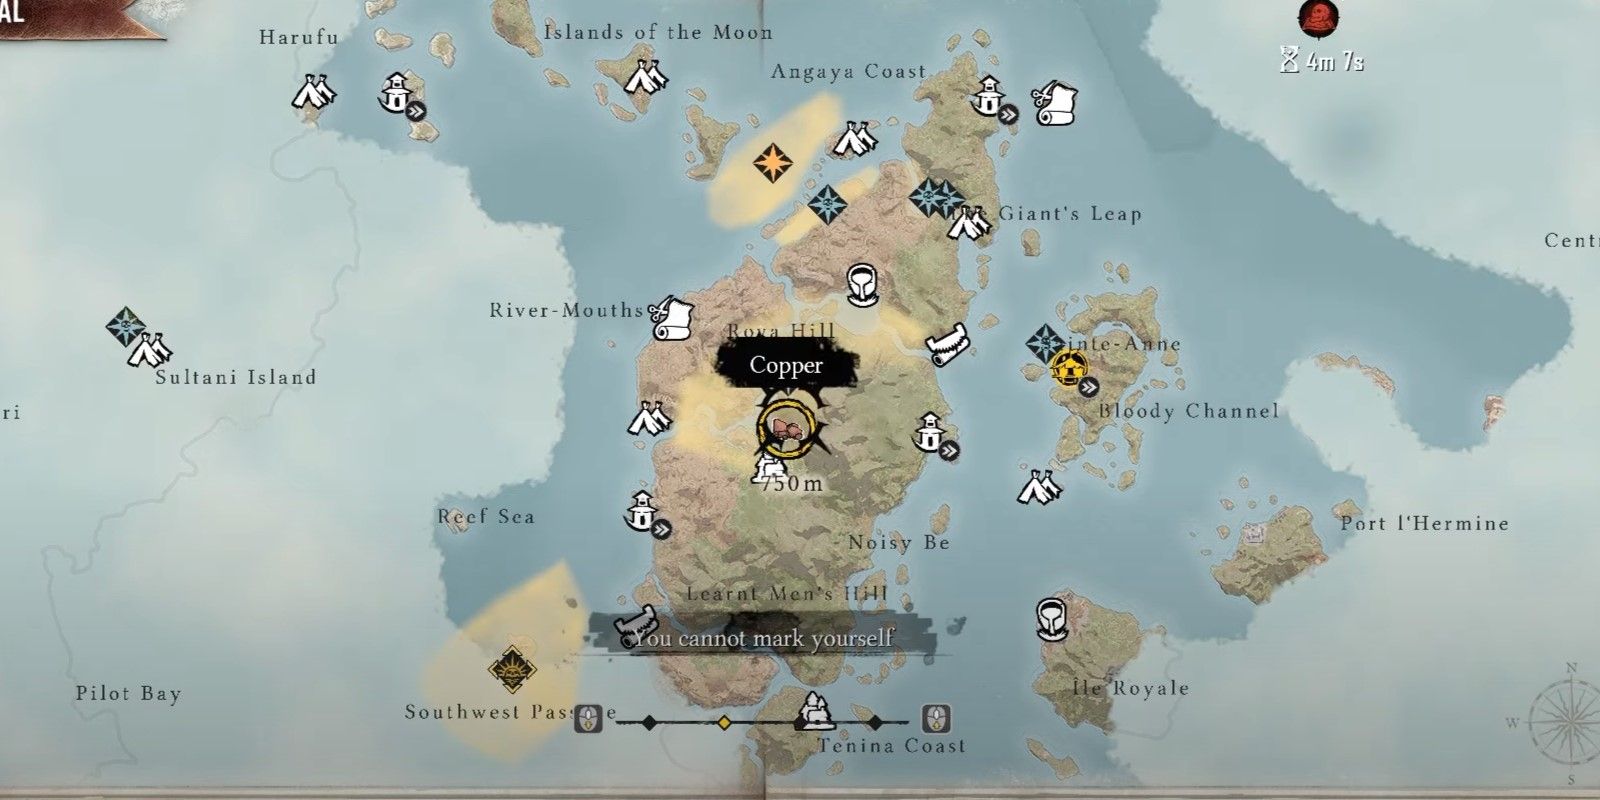 The Skull And Bones character is showing the map location of copper.